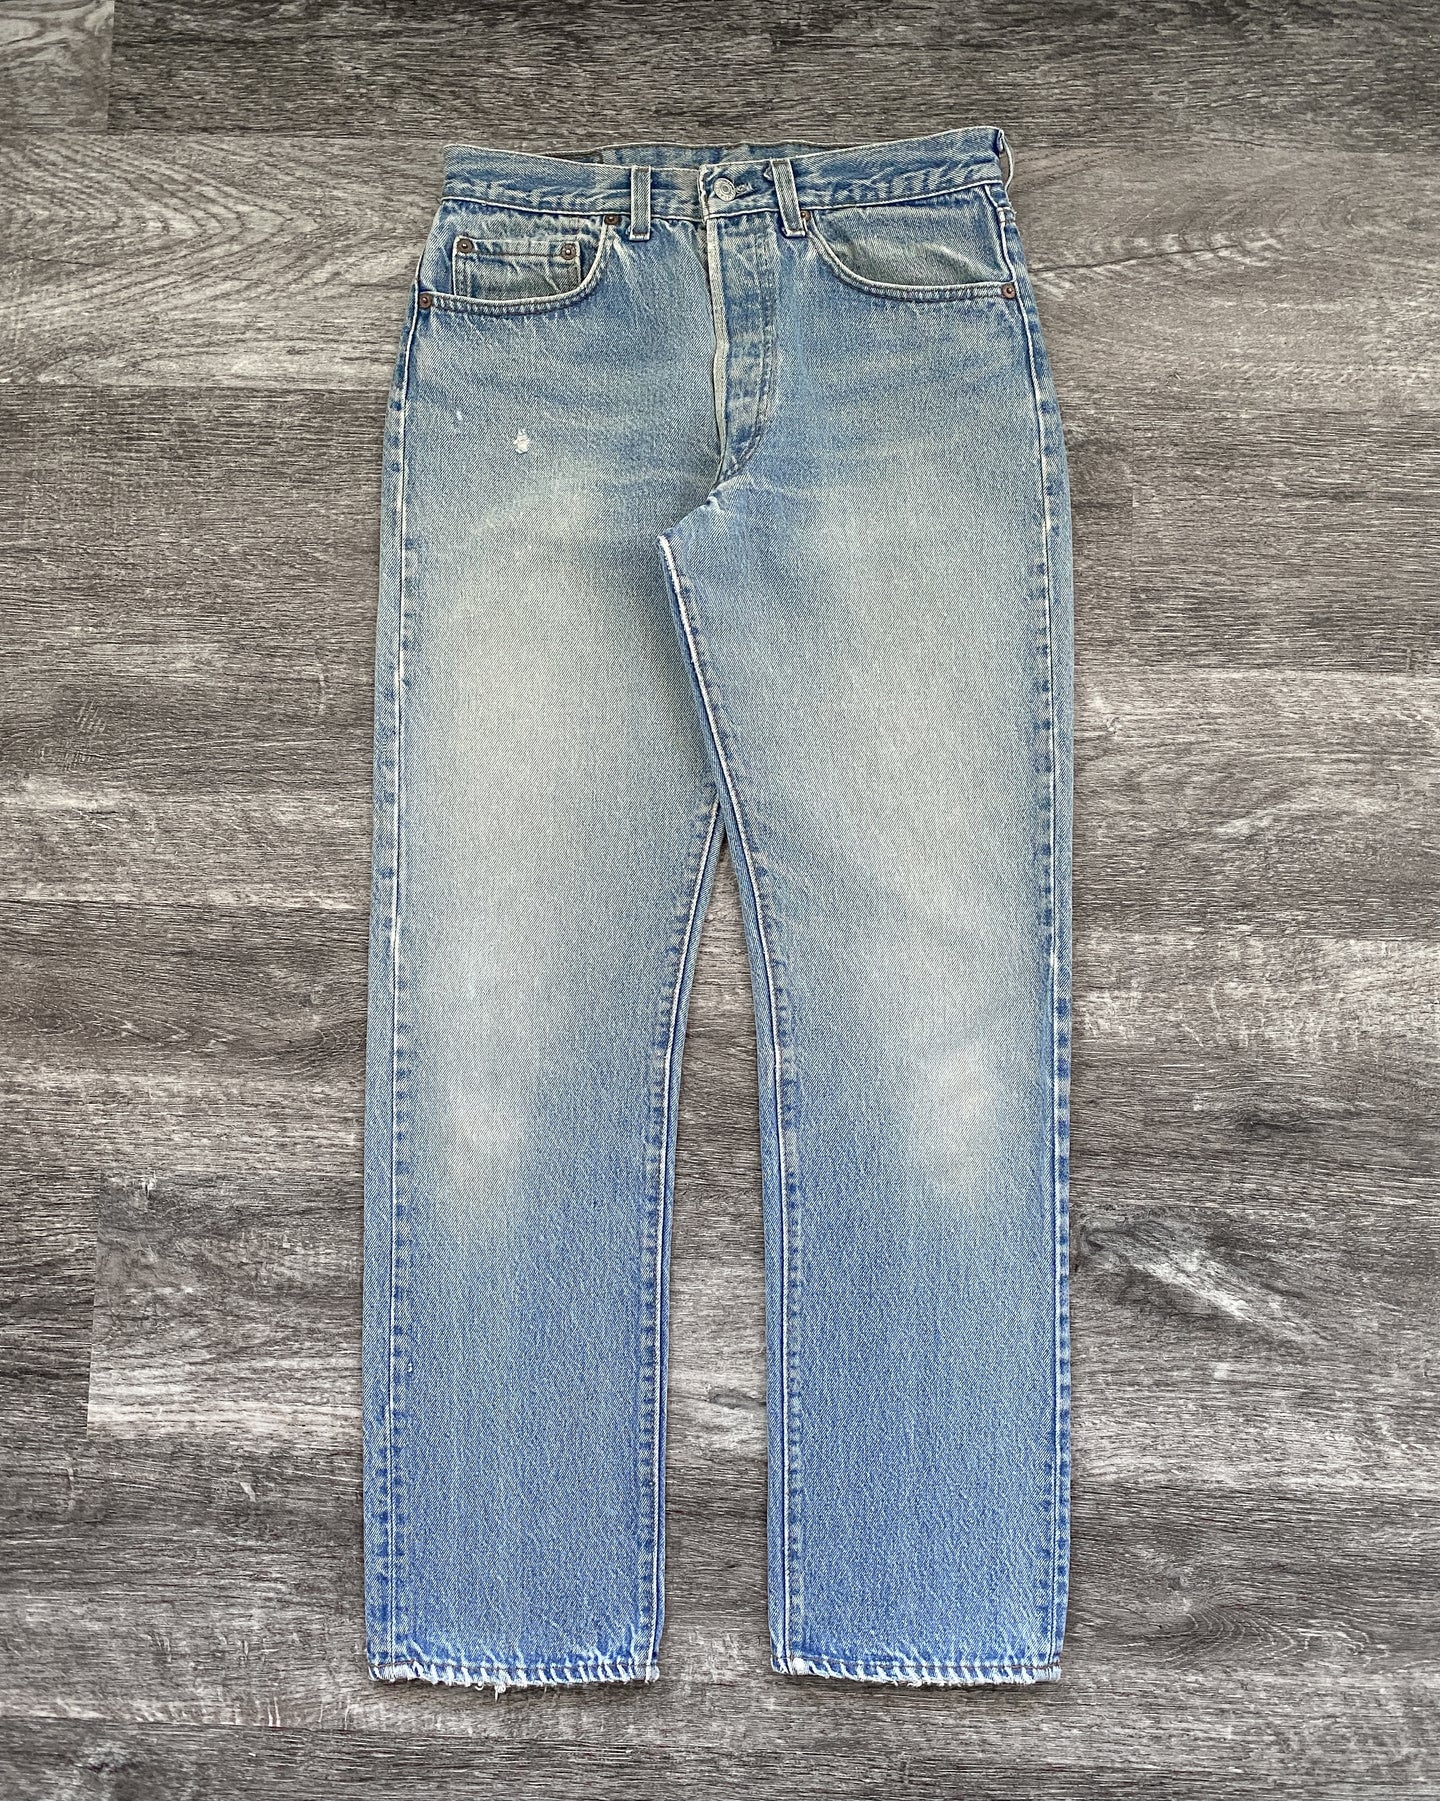 1990s Levi's Well Worn 501 - Size 30 x 31